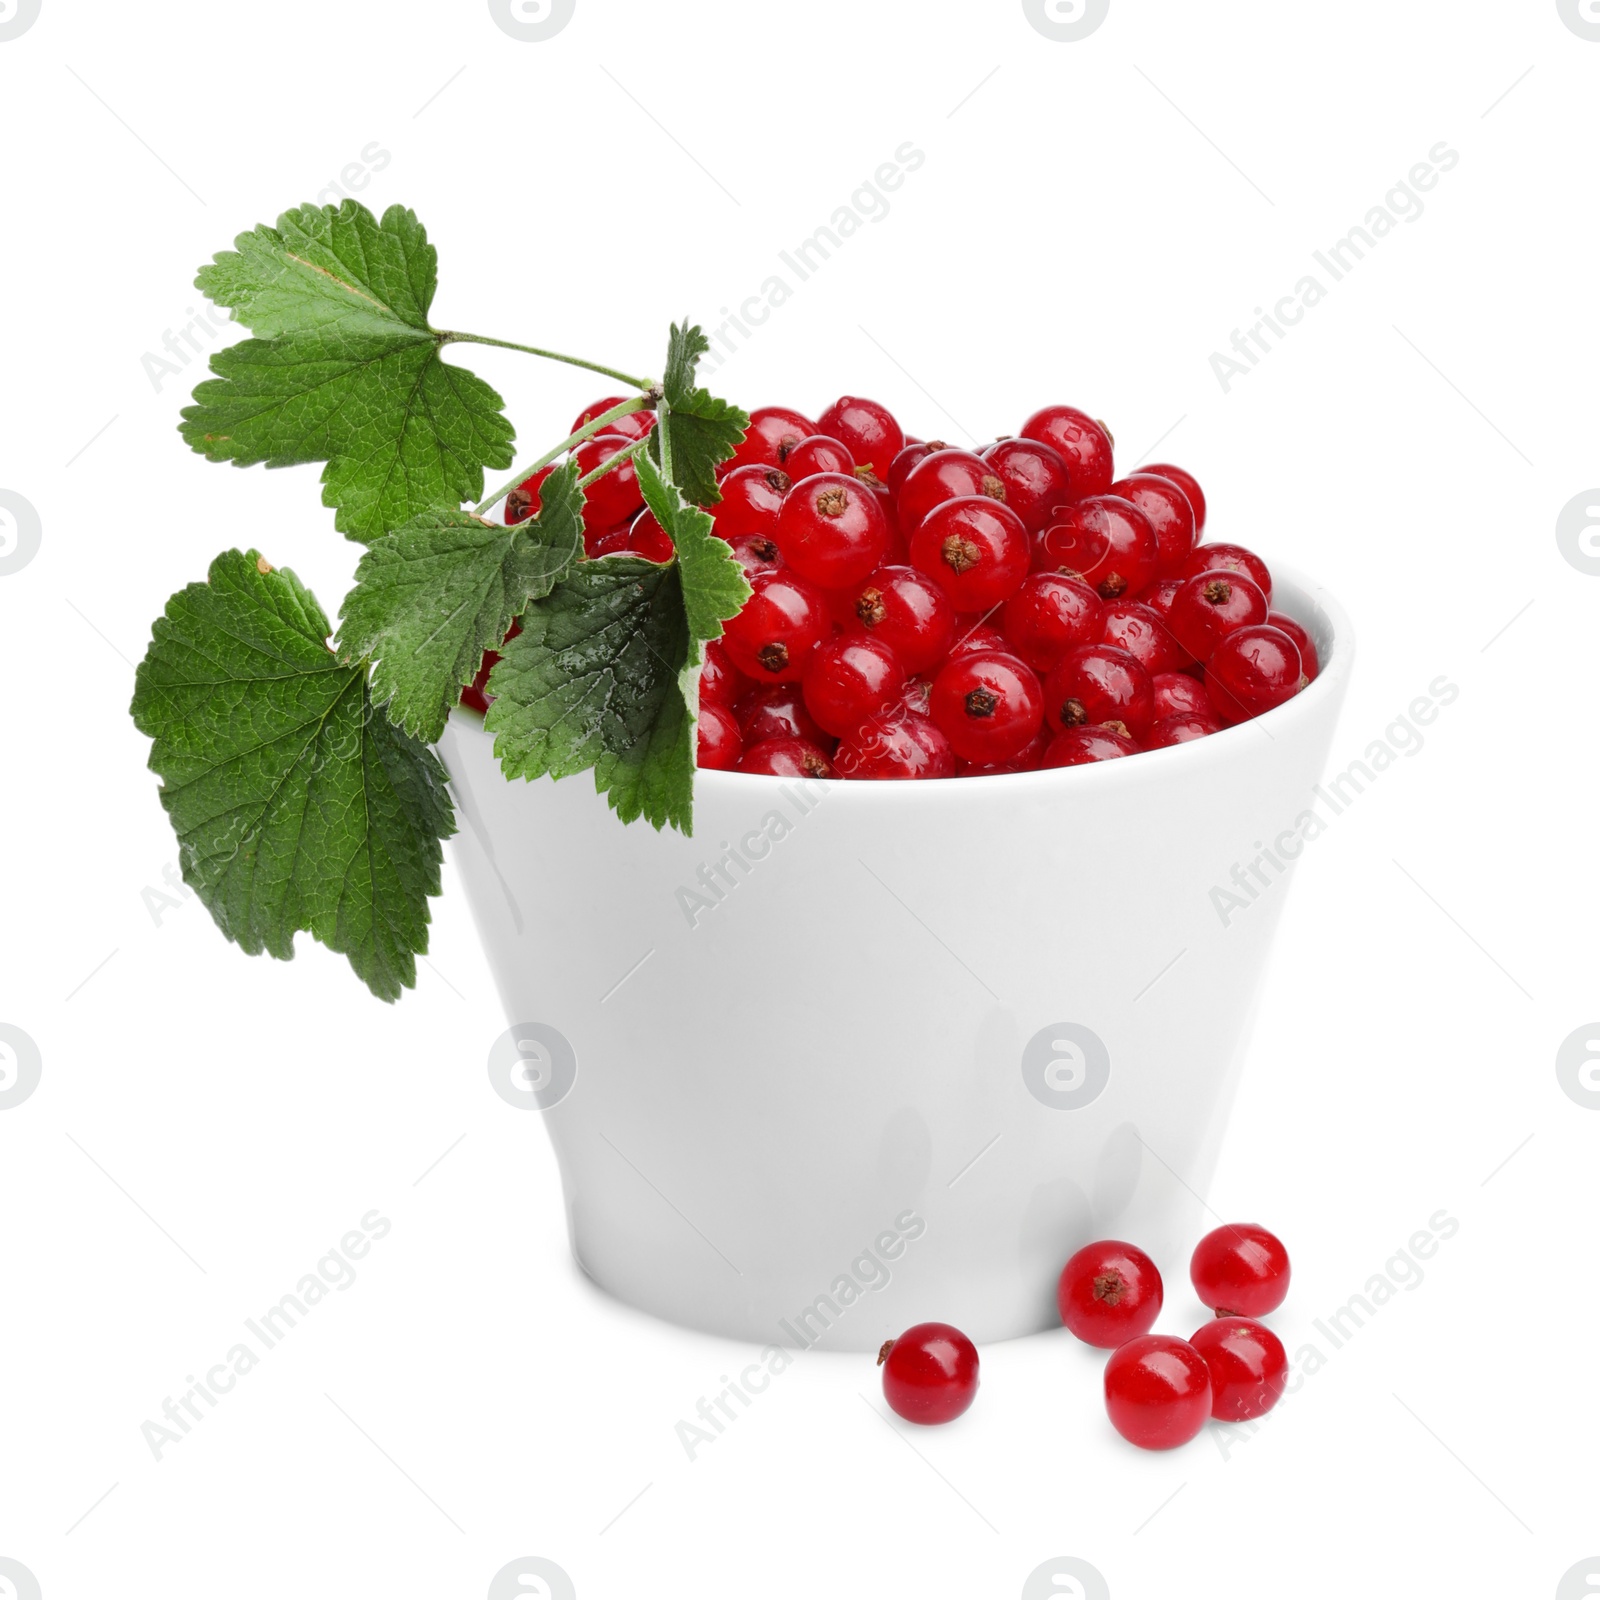 Photo of Tasty ripe redcurrants and green leaves in bowl isolated on white